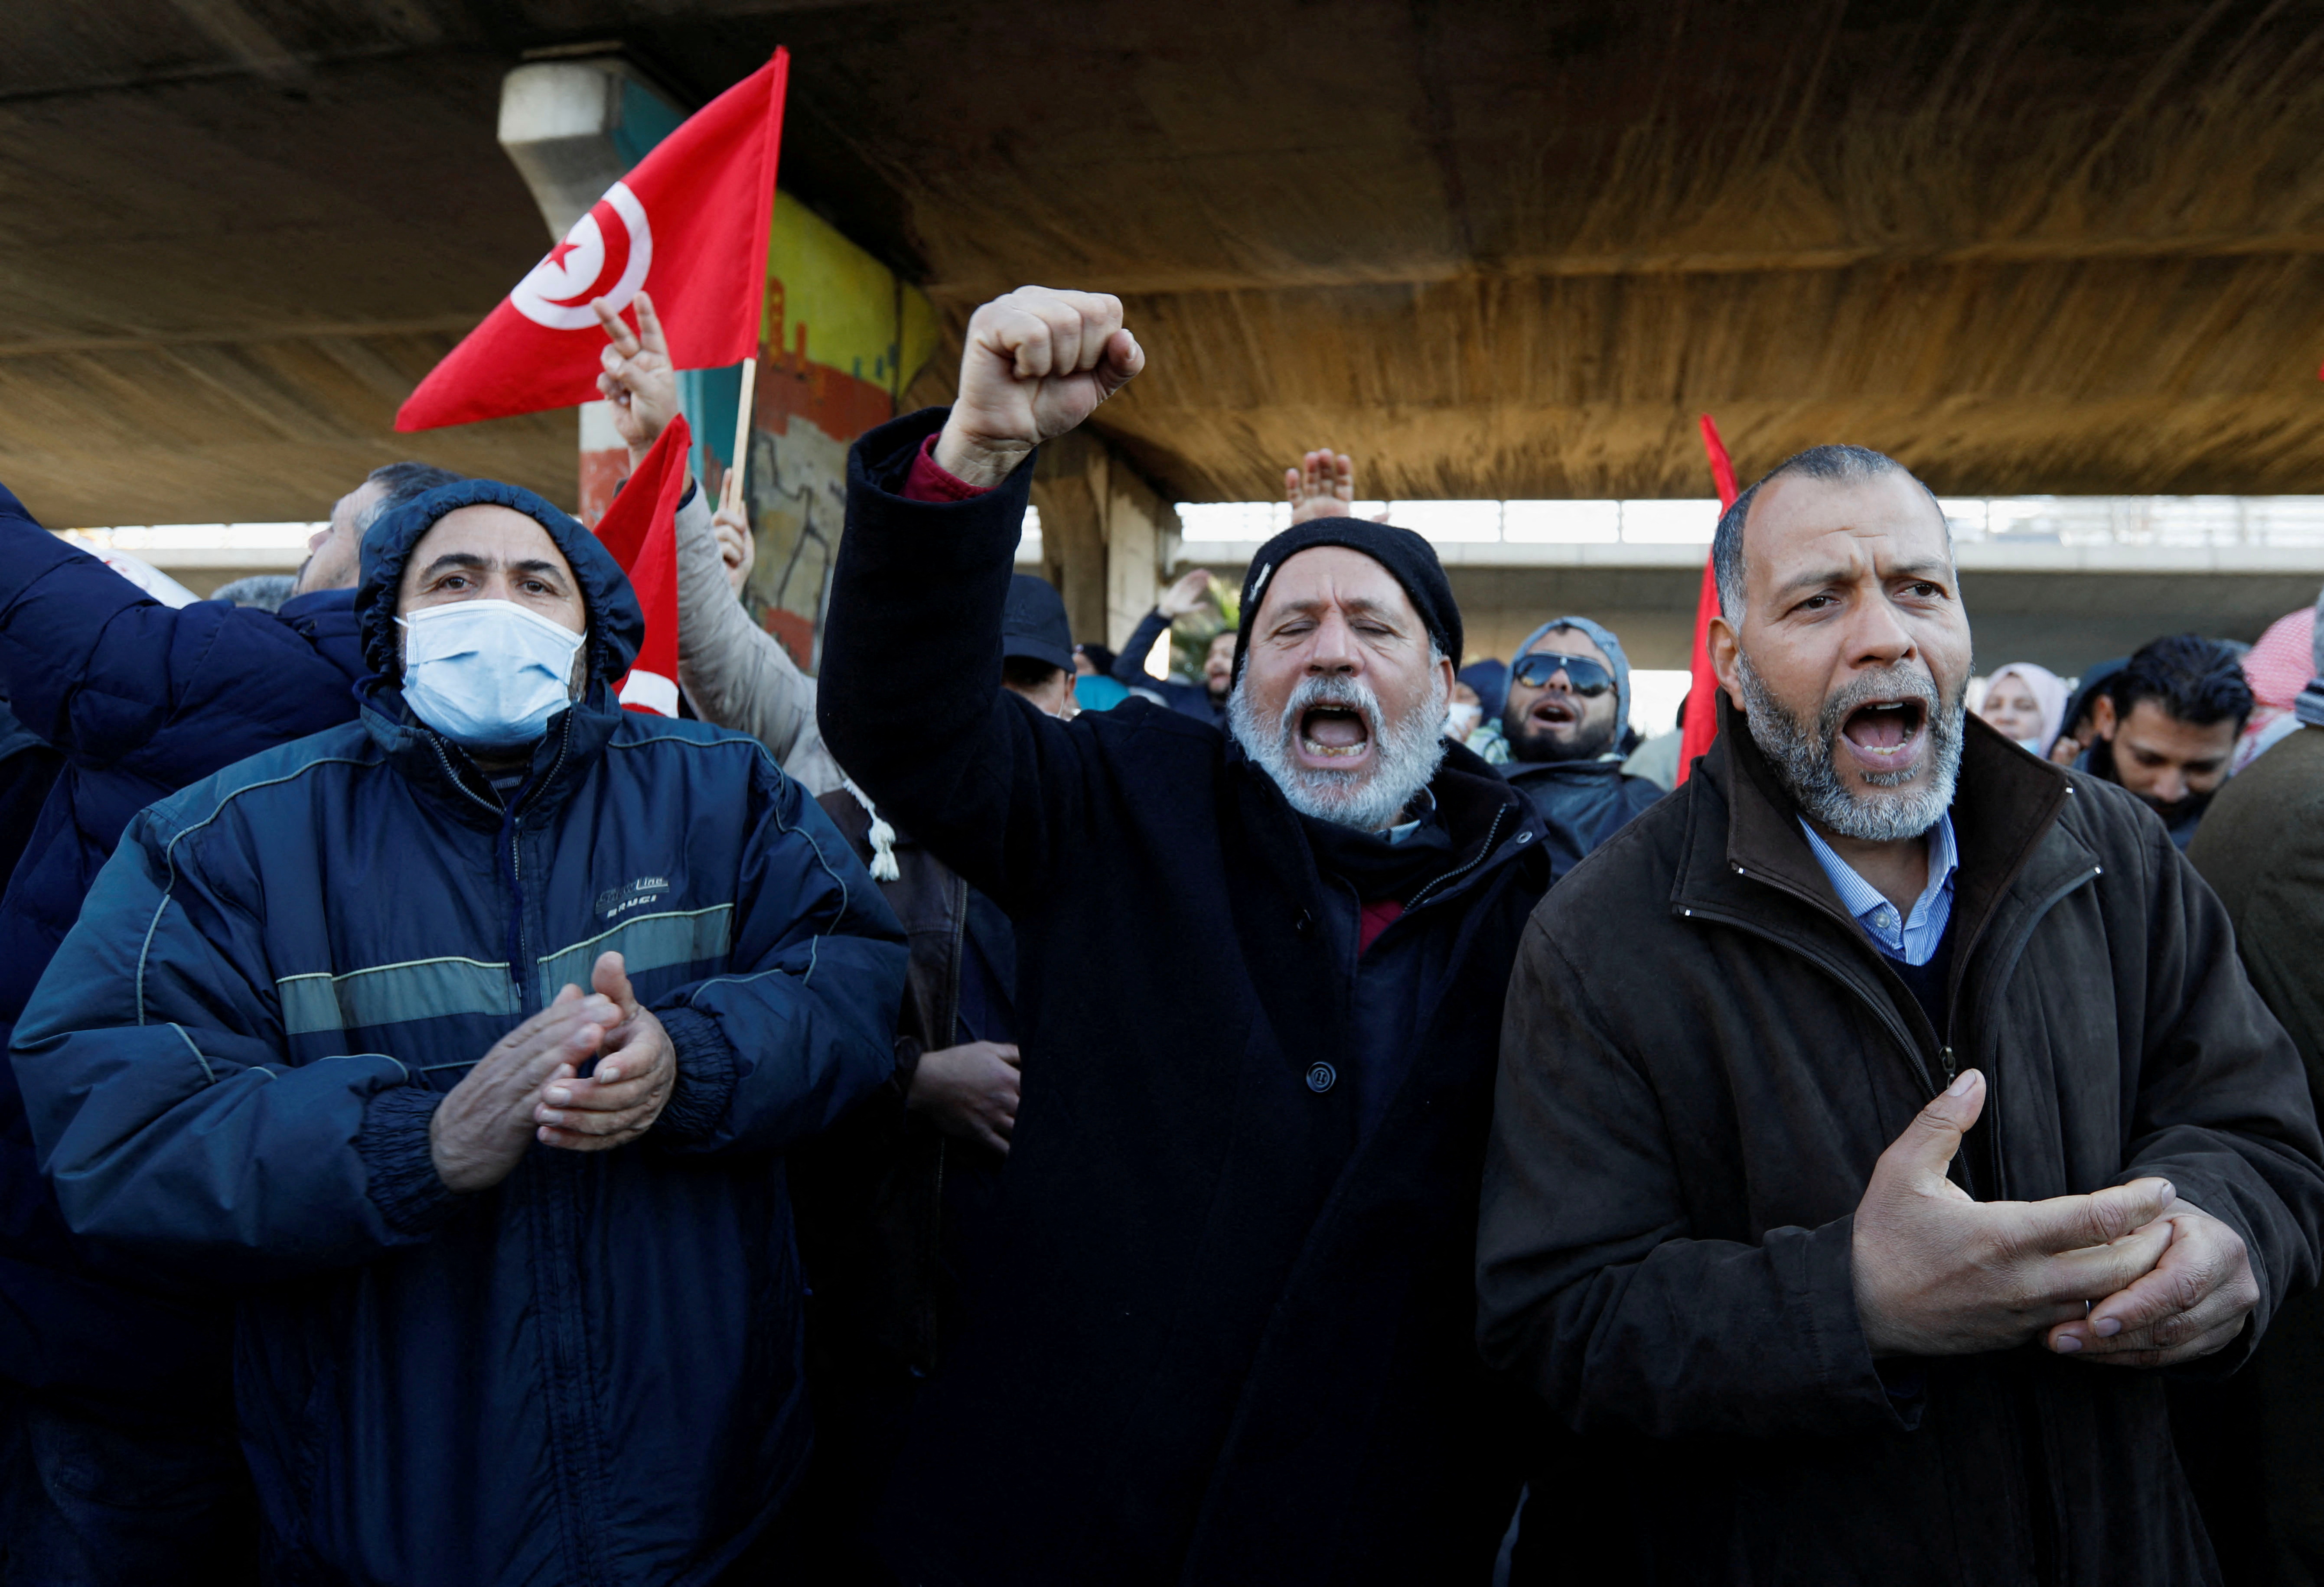 Protest against Tunisian President Saied's seizure of governing power, in Tunis